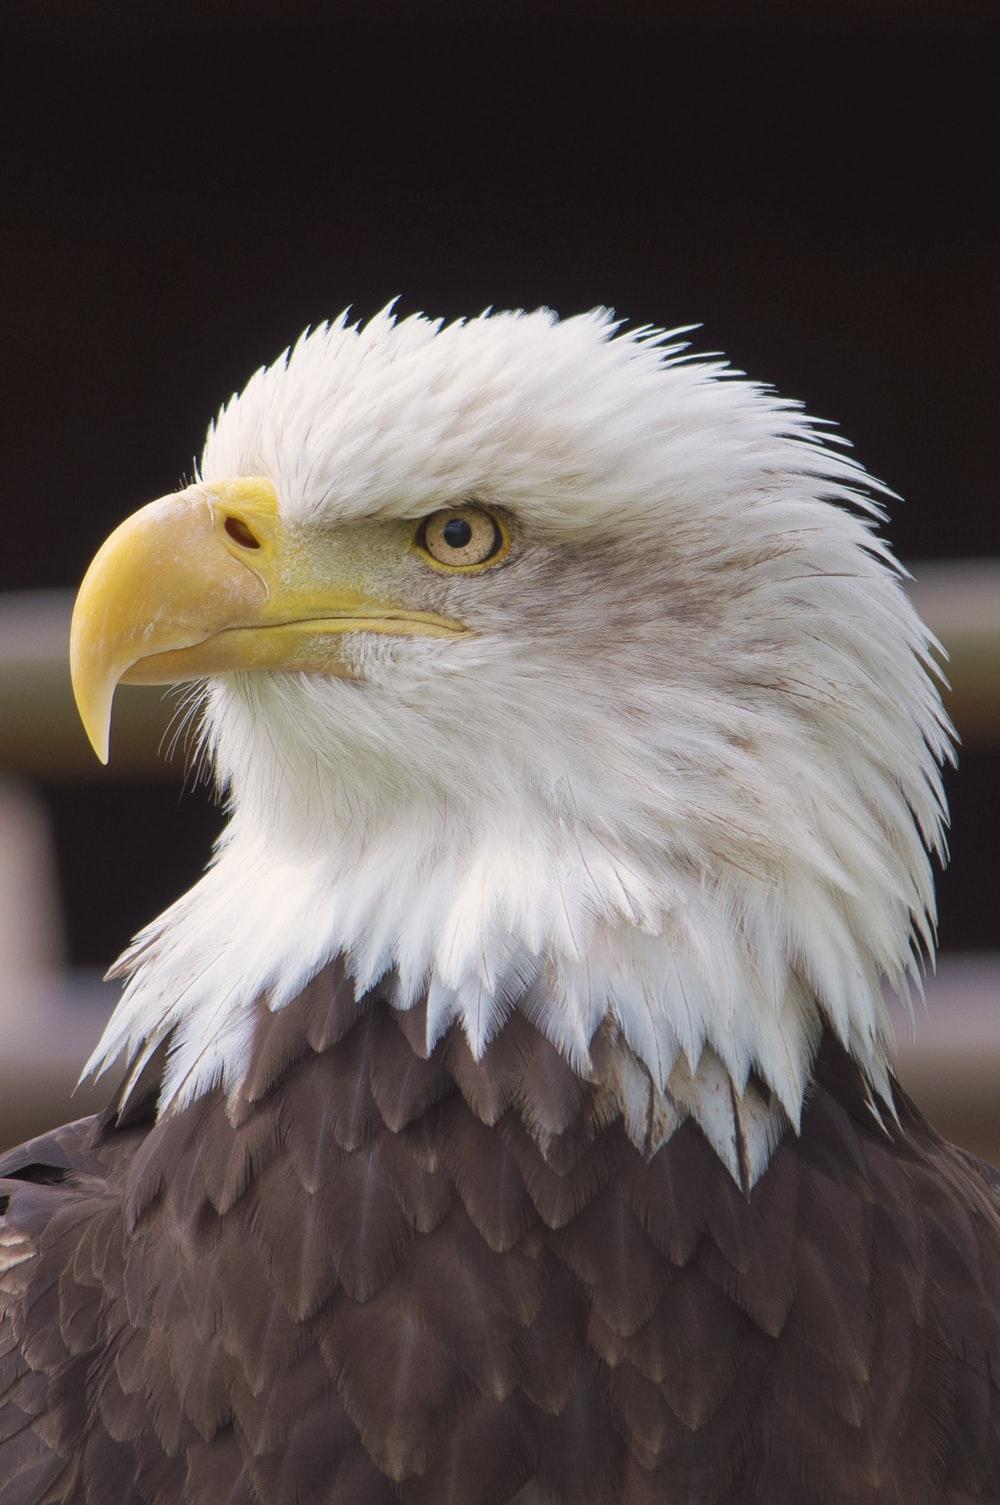 Eagle Picture. Download Free Image